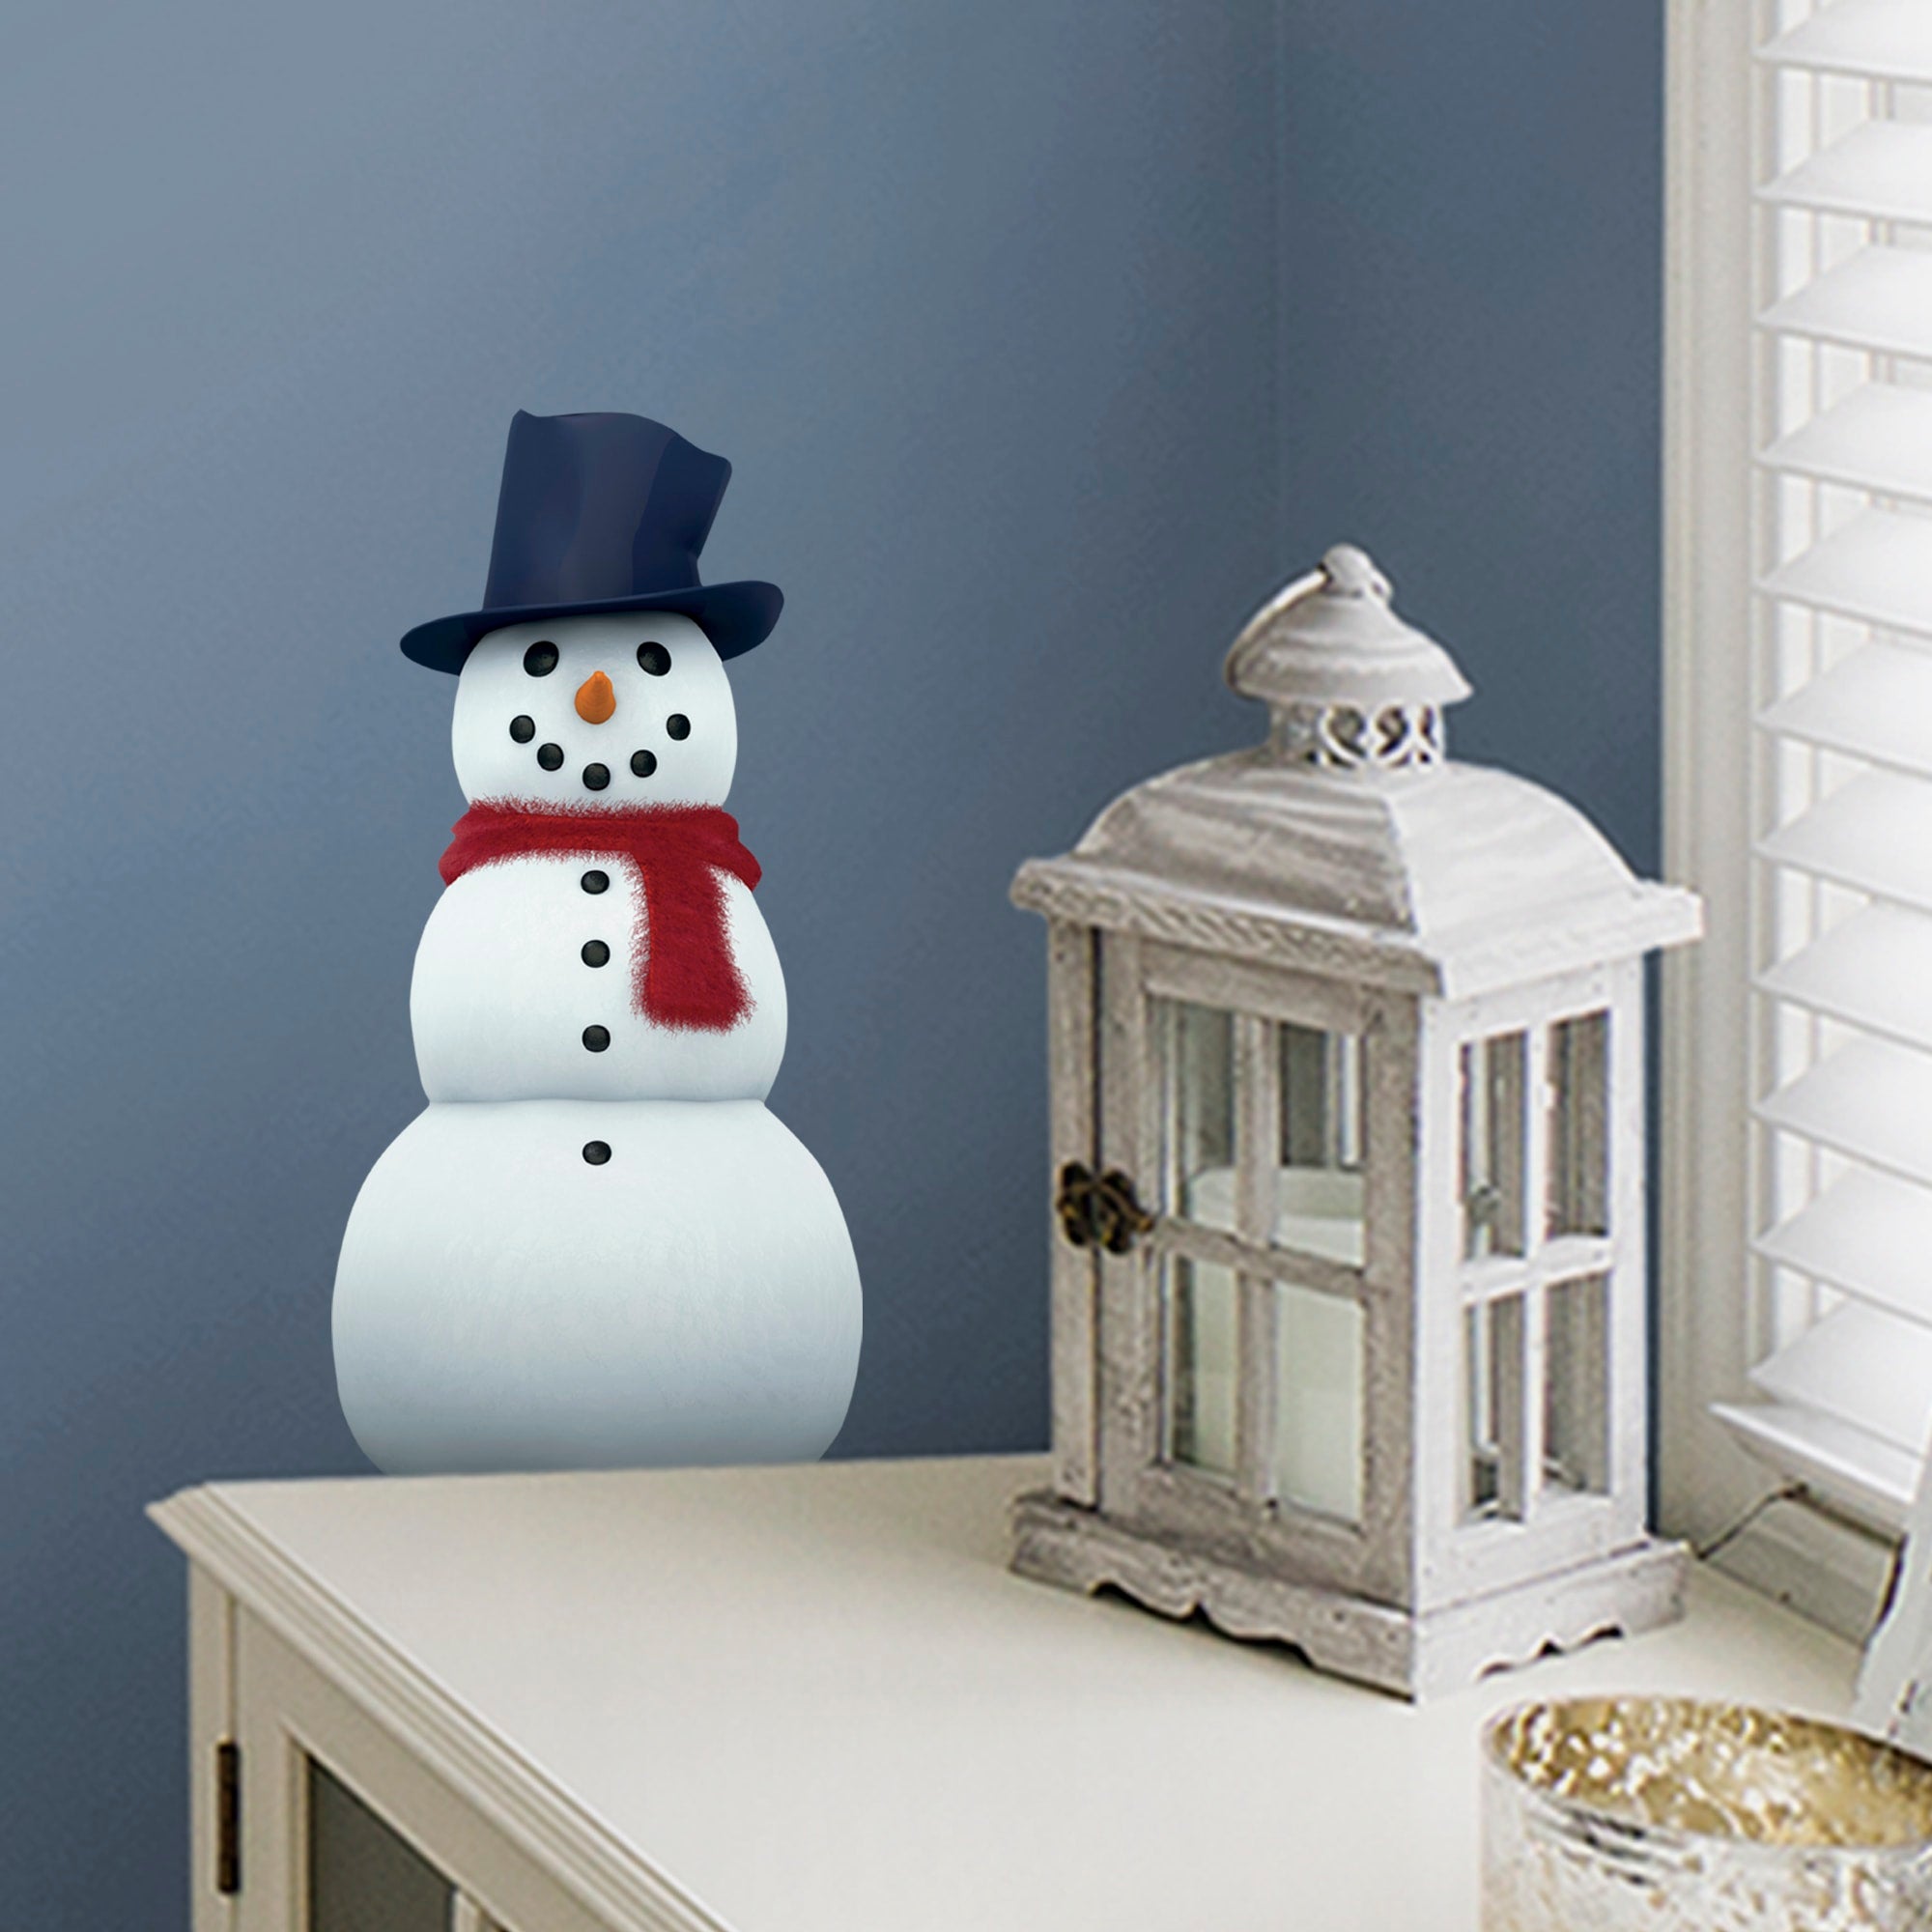 Snowman - Removable Vinyl Decal Large by Fathead